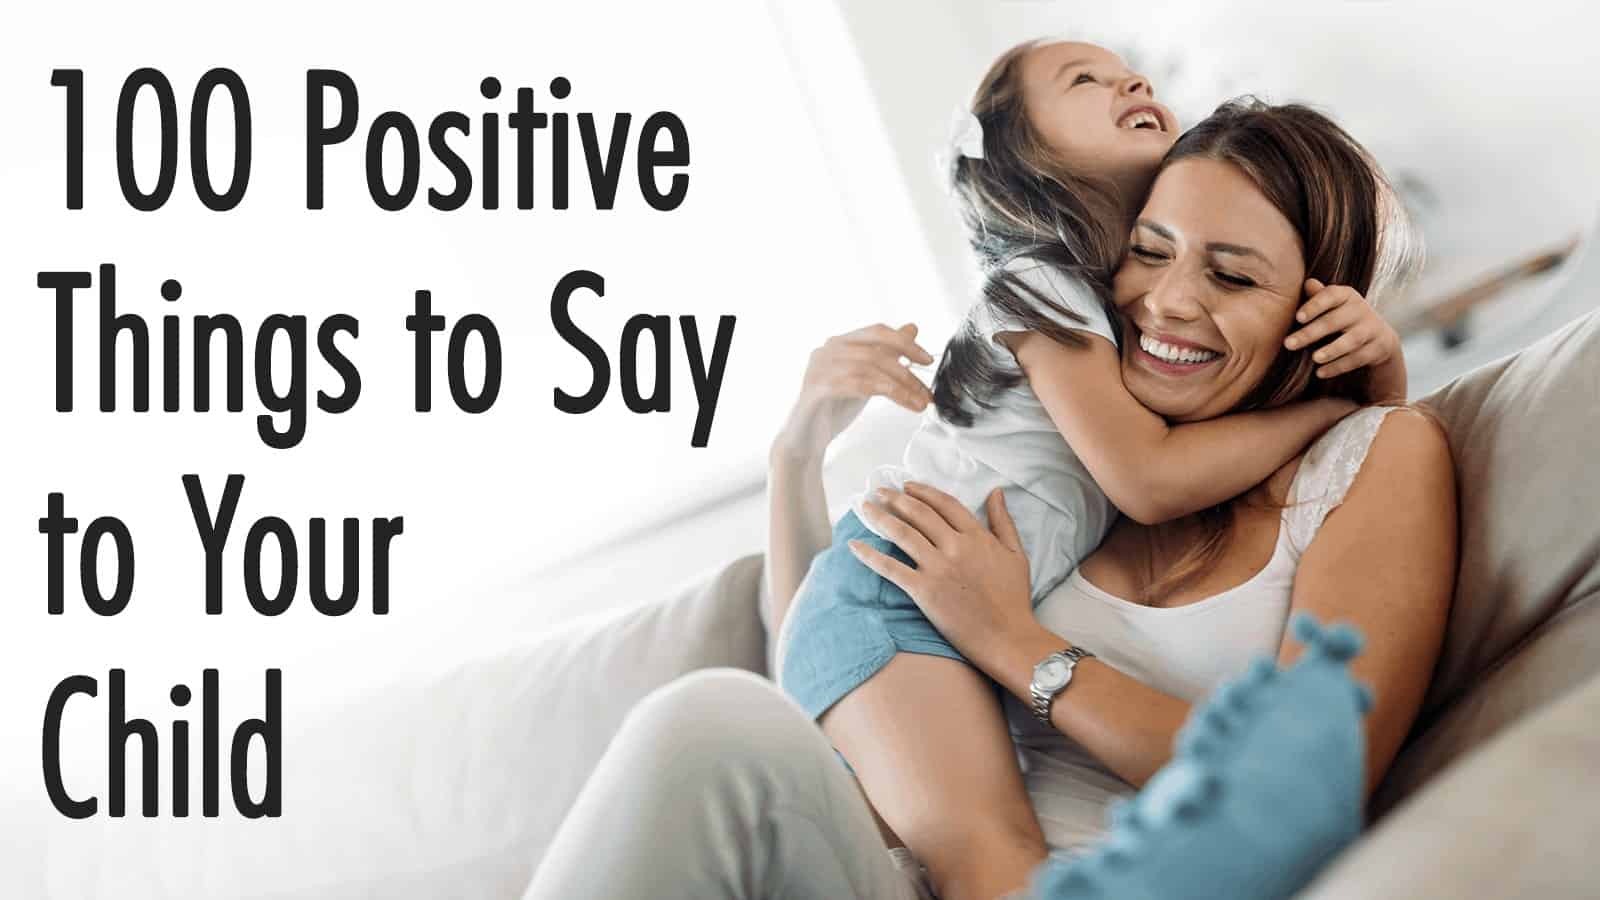 100 Positive Things to Say to Your Child